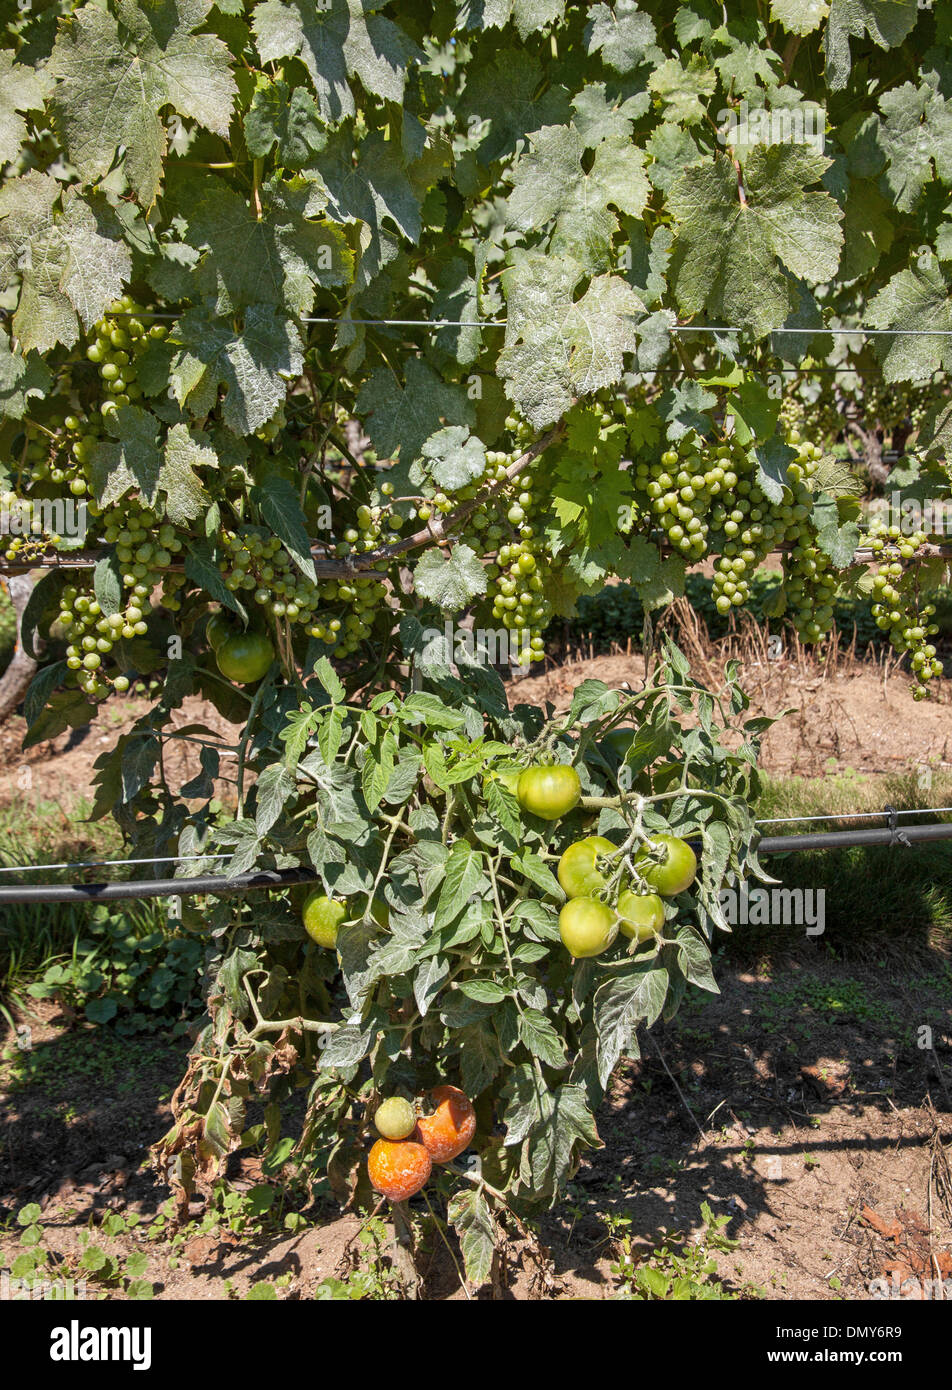 Grapes (fruit)  and tomatoes (vegetable) both ripening in the same location. Stock Photo